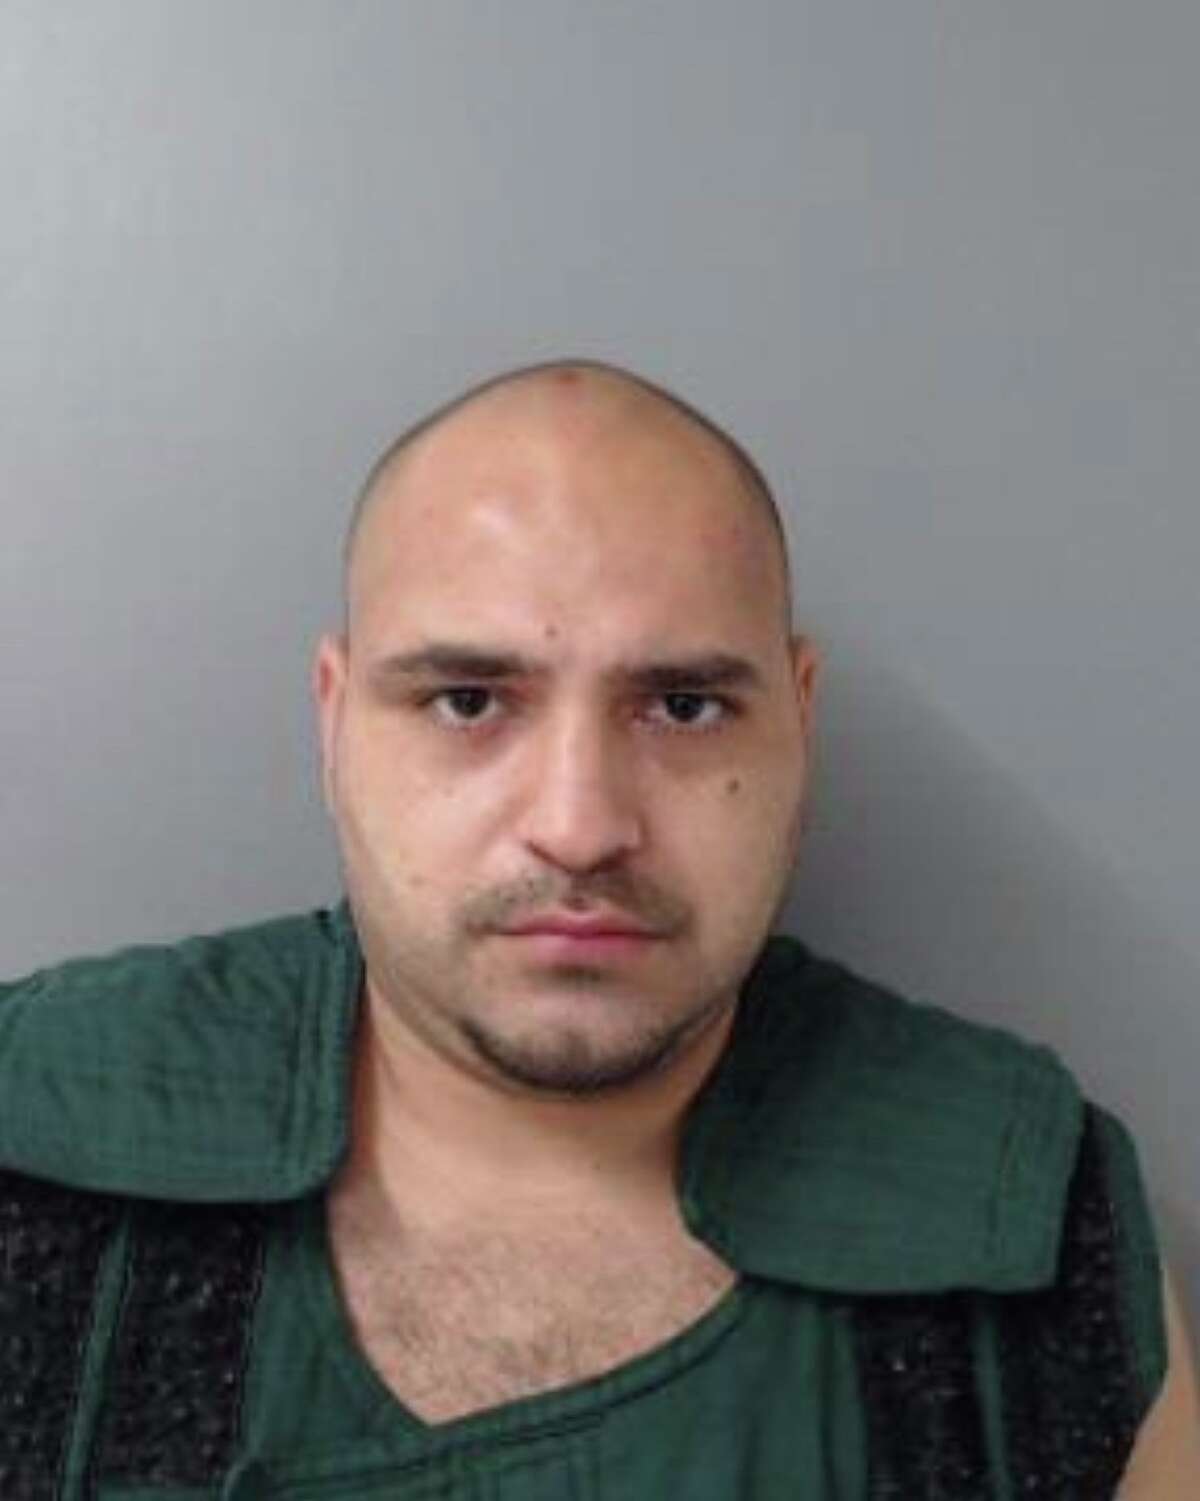 Ignacio Salinas IV was arrested for allegedly stealing another man's wallet after they were involved in a car accident together and using it to spend money at a convenience store on Aug. 30, 2022, according to the Laredo Police Department.